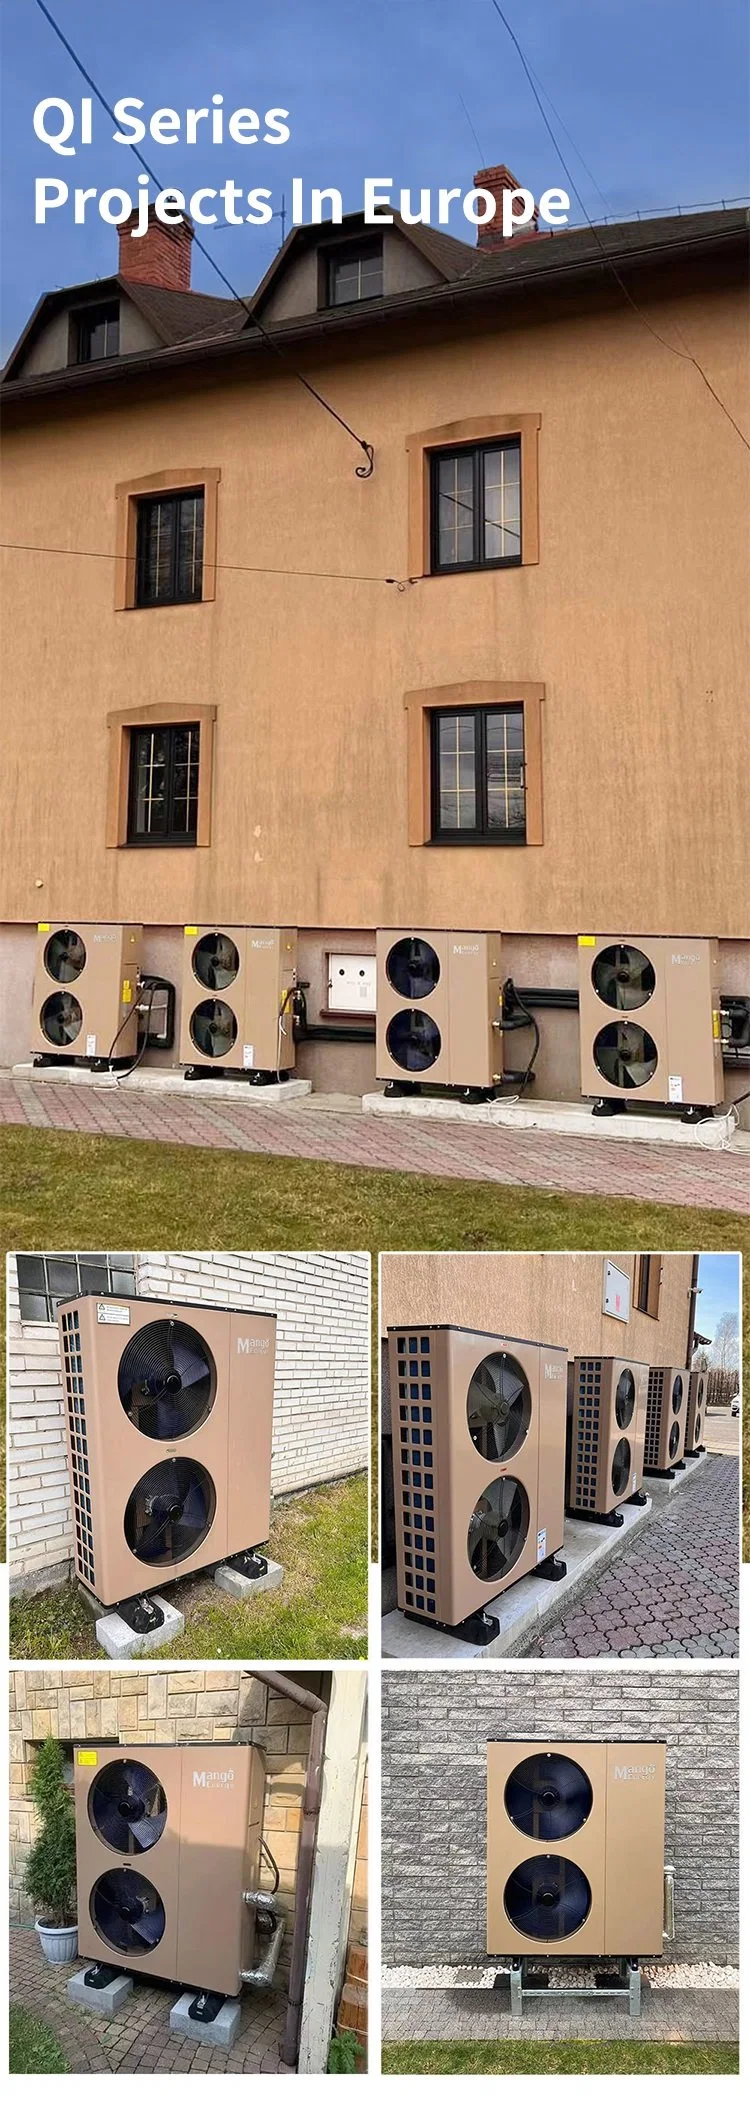 Hot Water Heating System for House Solar Warm Energy Evi DC Air to Water Heat Pump